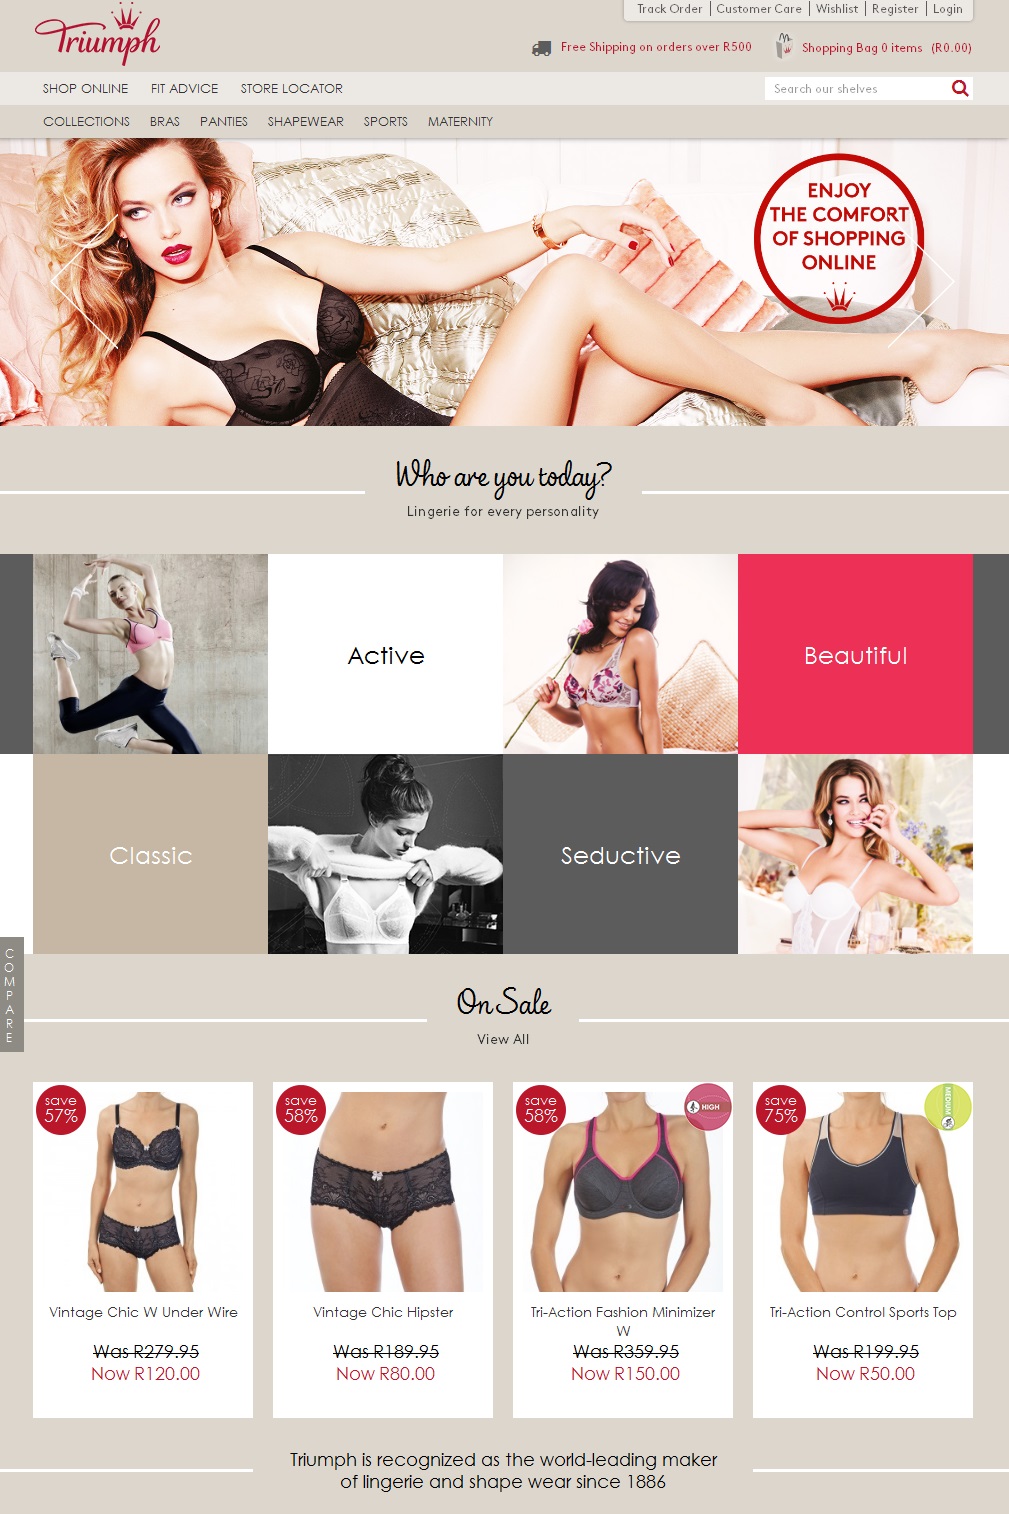 E-Commerce website designed and built by VAIMO